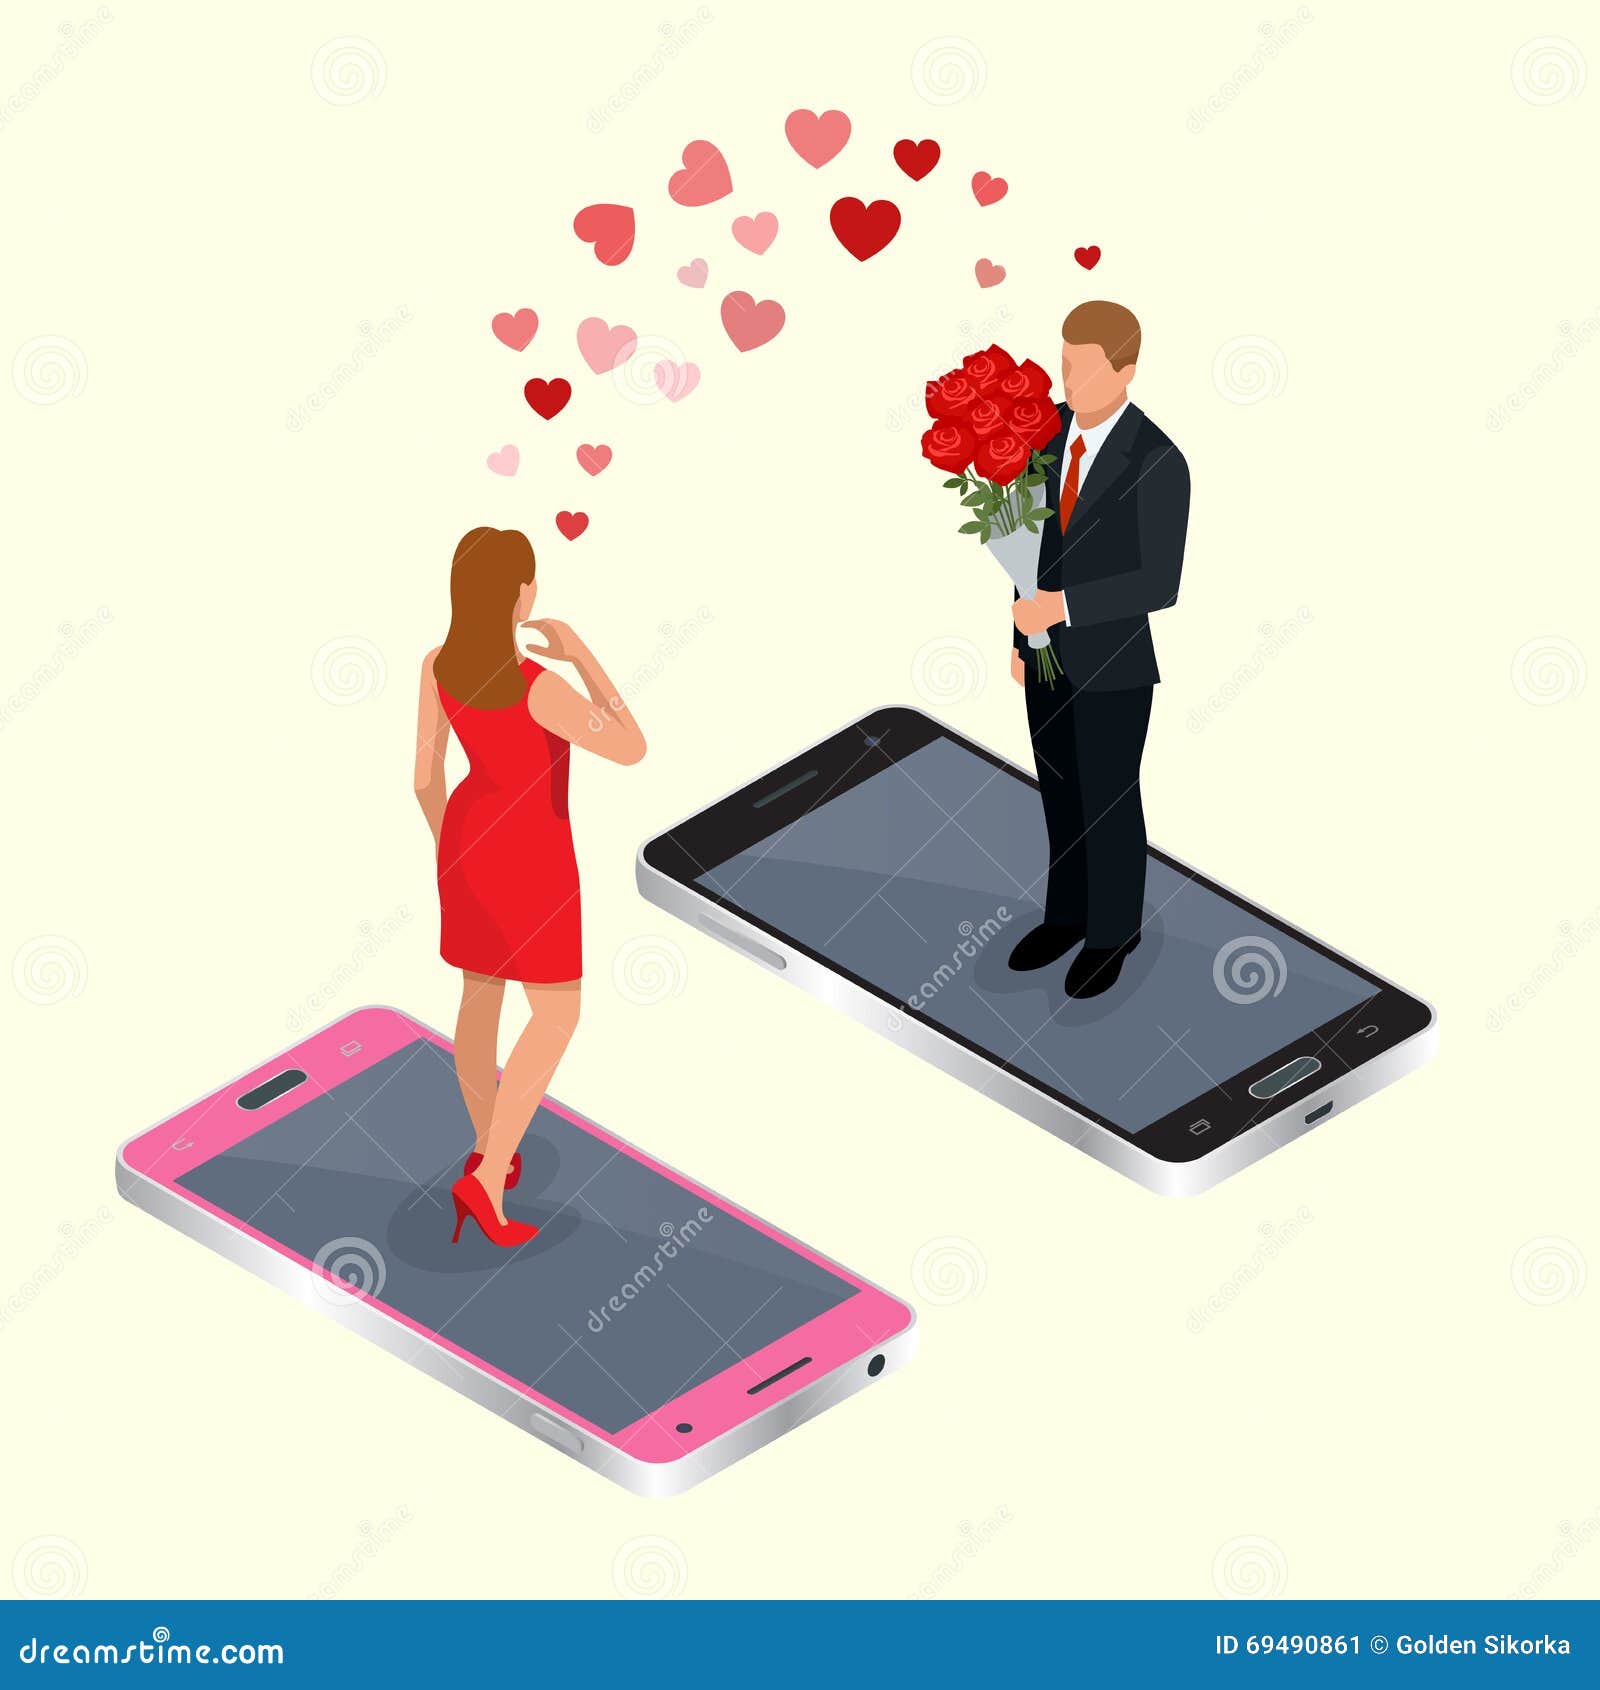 How many marriages start from online dating